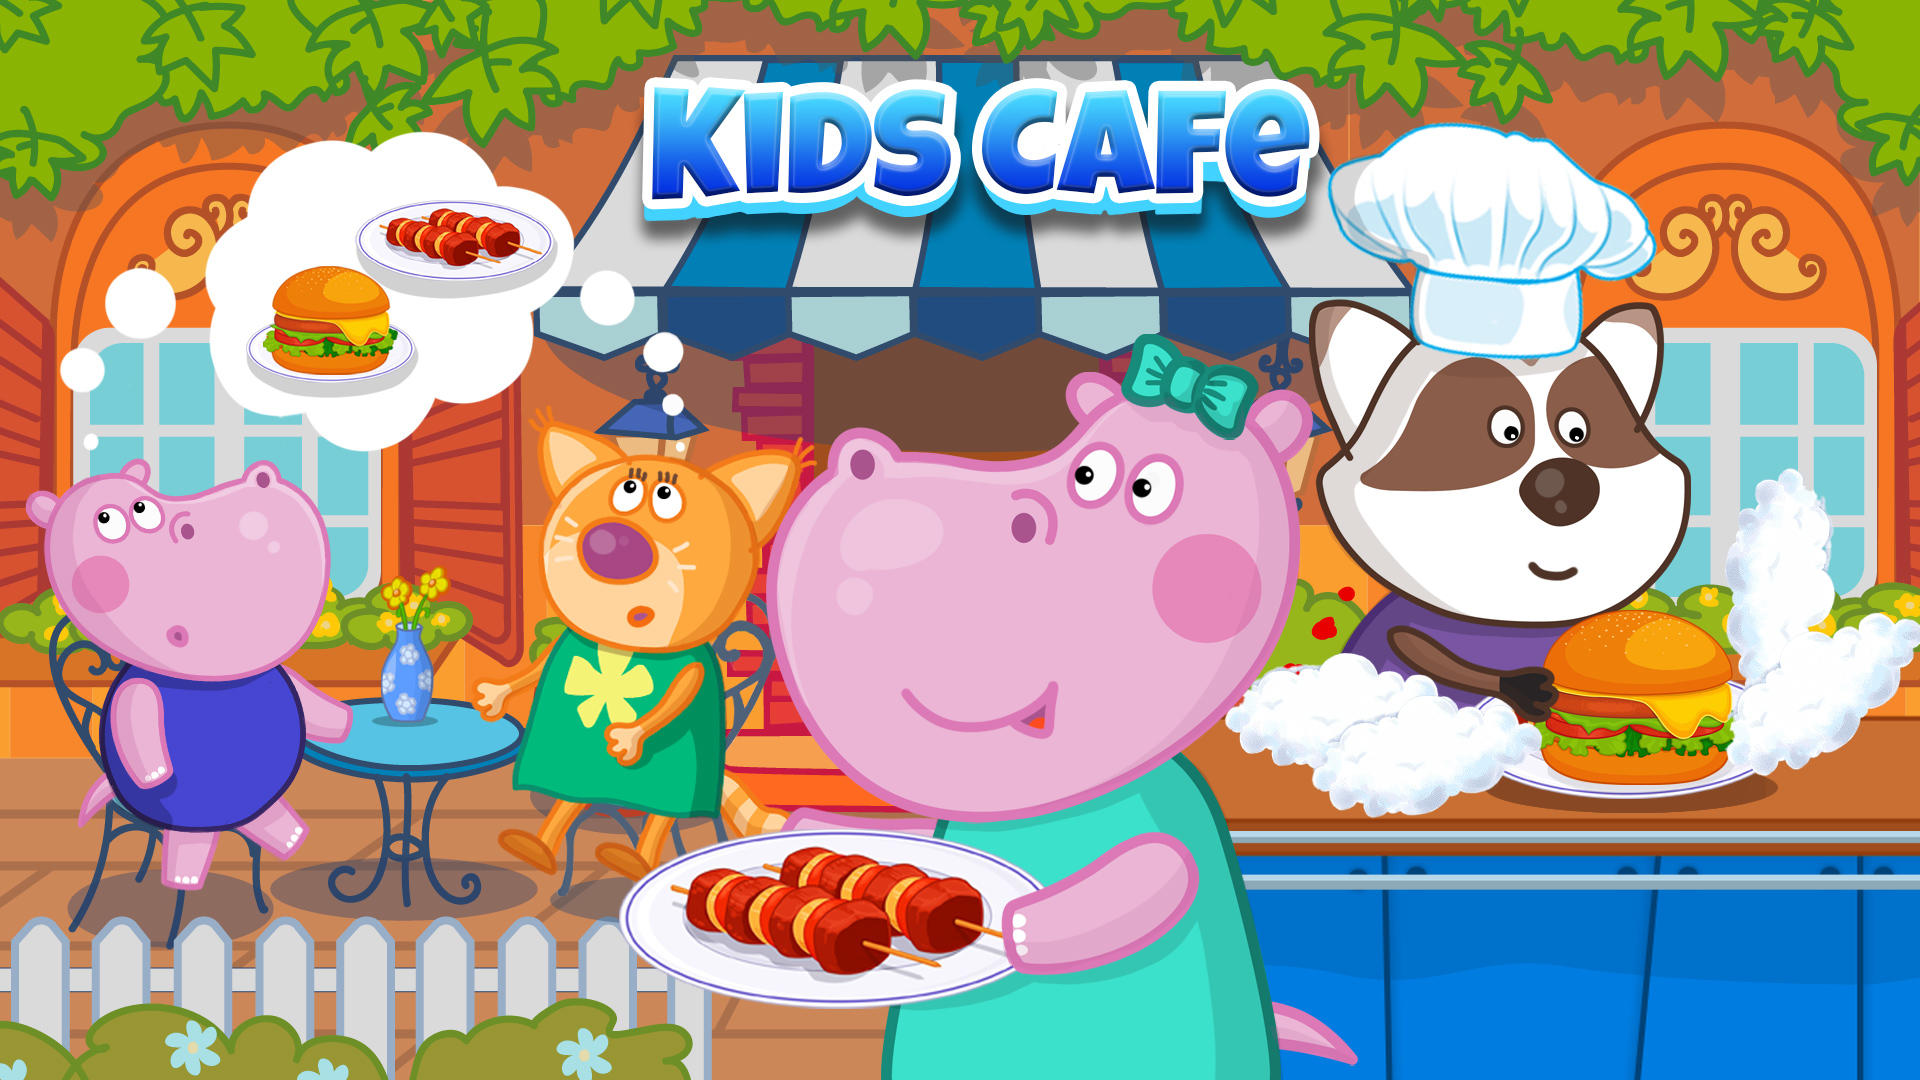 Cafe Hippo - APK Download for Android